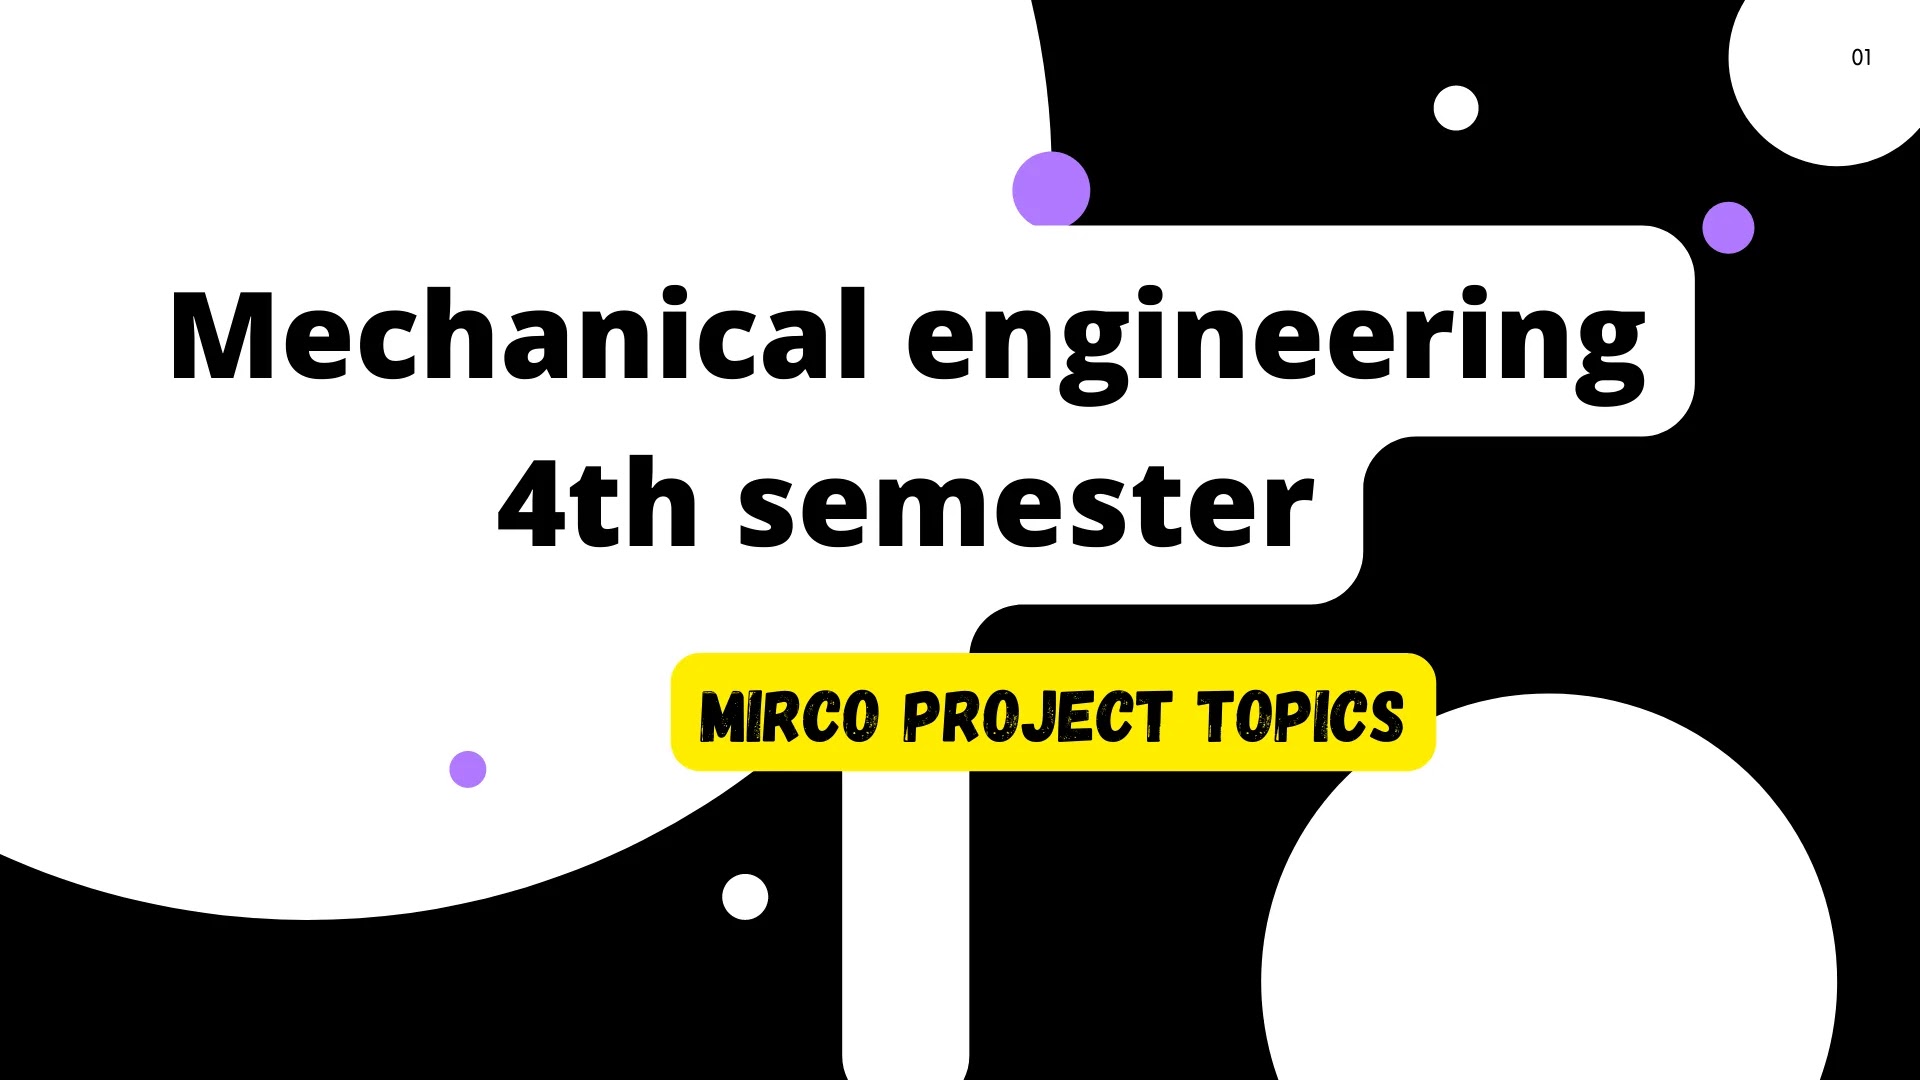 MSBTE Mechanical engineering 4th semester mirco projects topics i ...